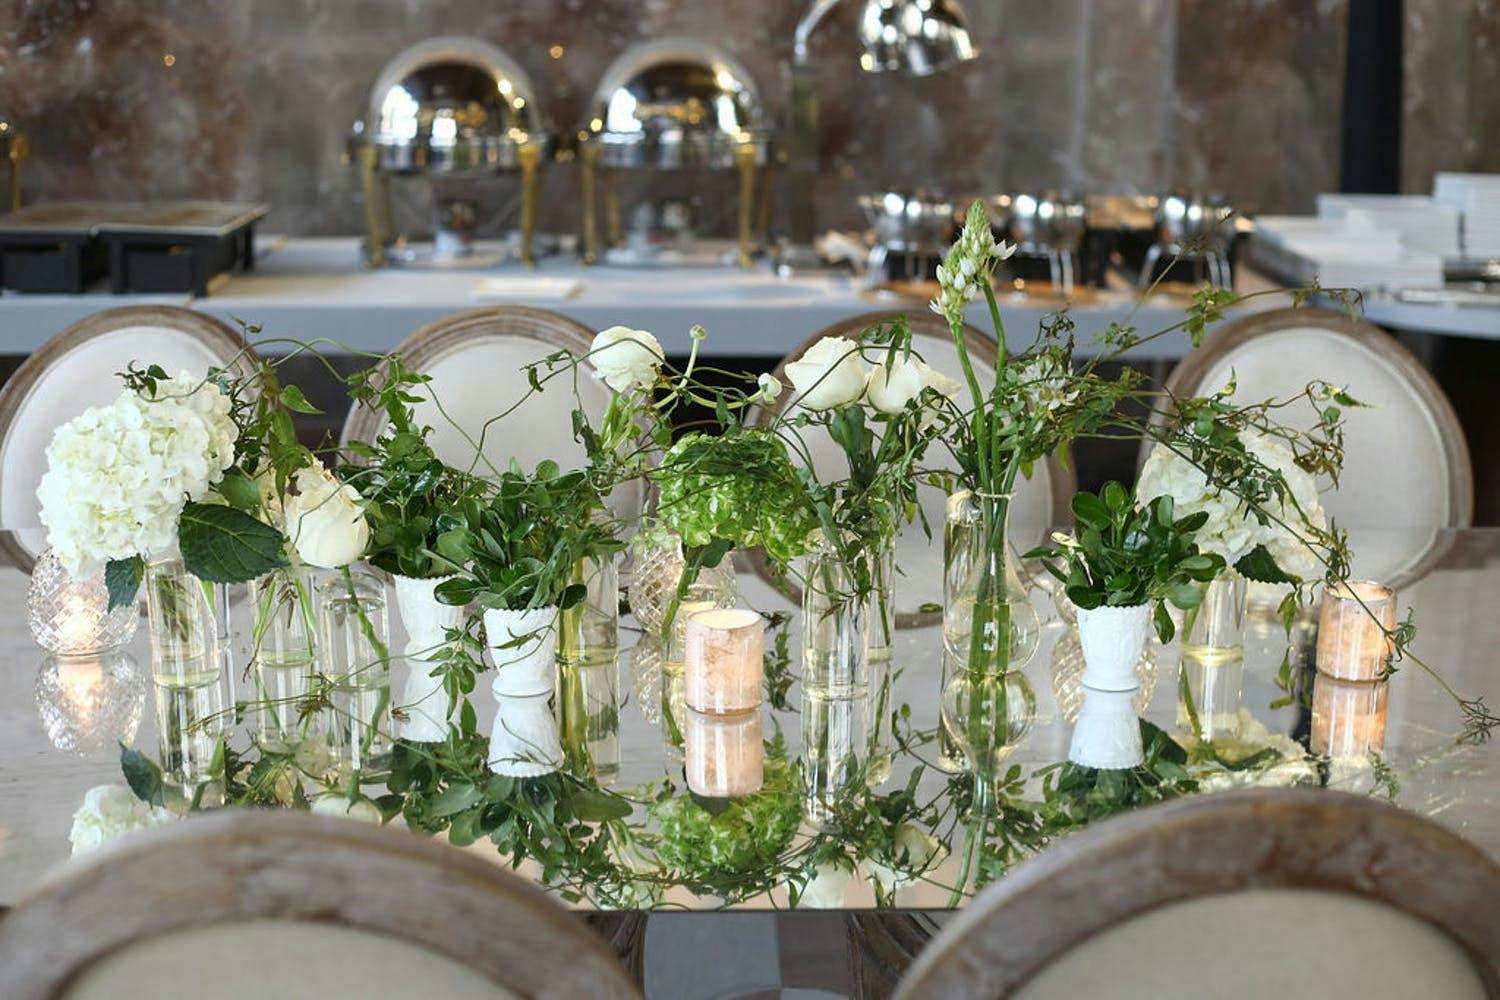 Modern Wedding With Organic Greenery Centerpieces | PartySlate